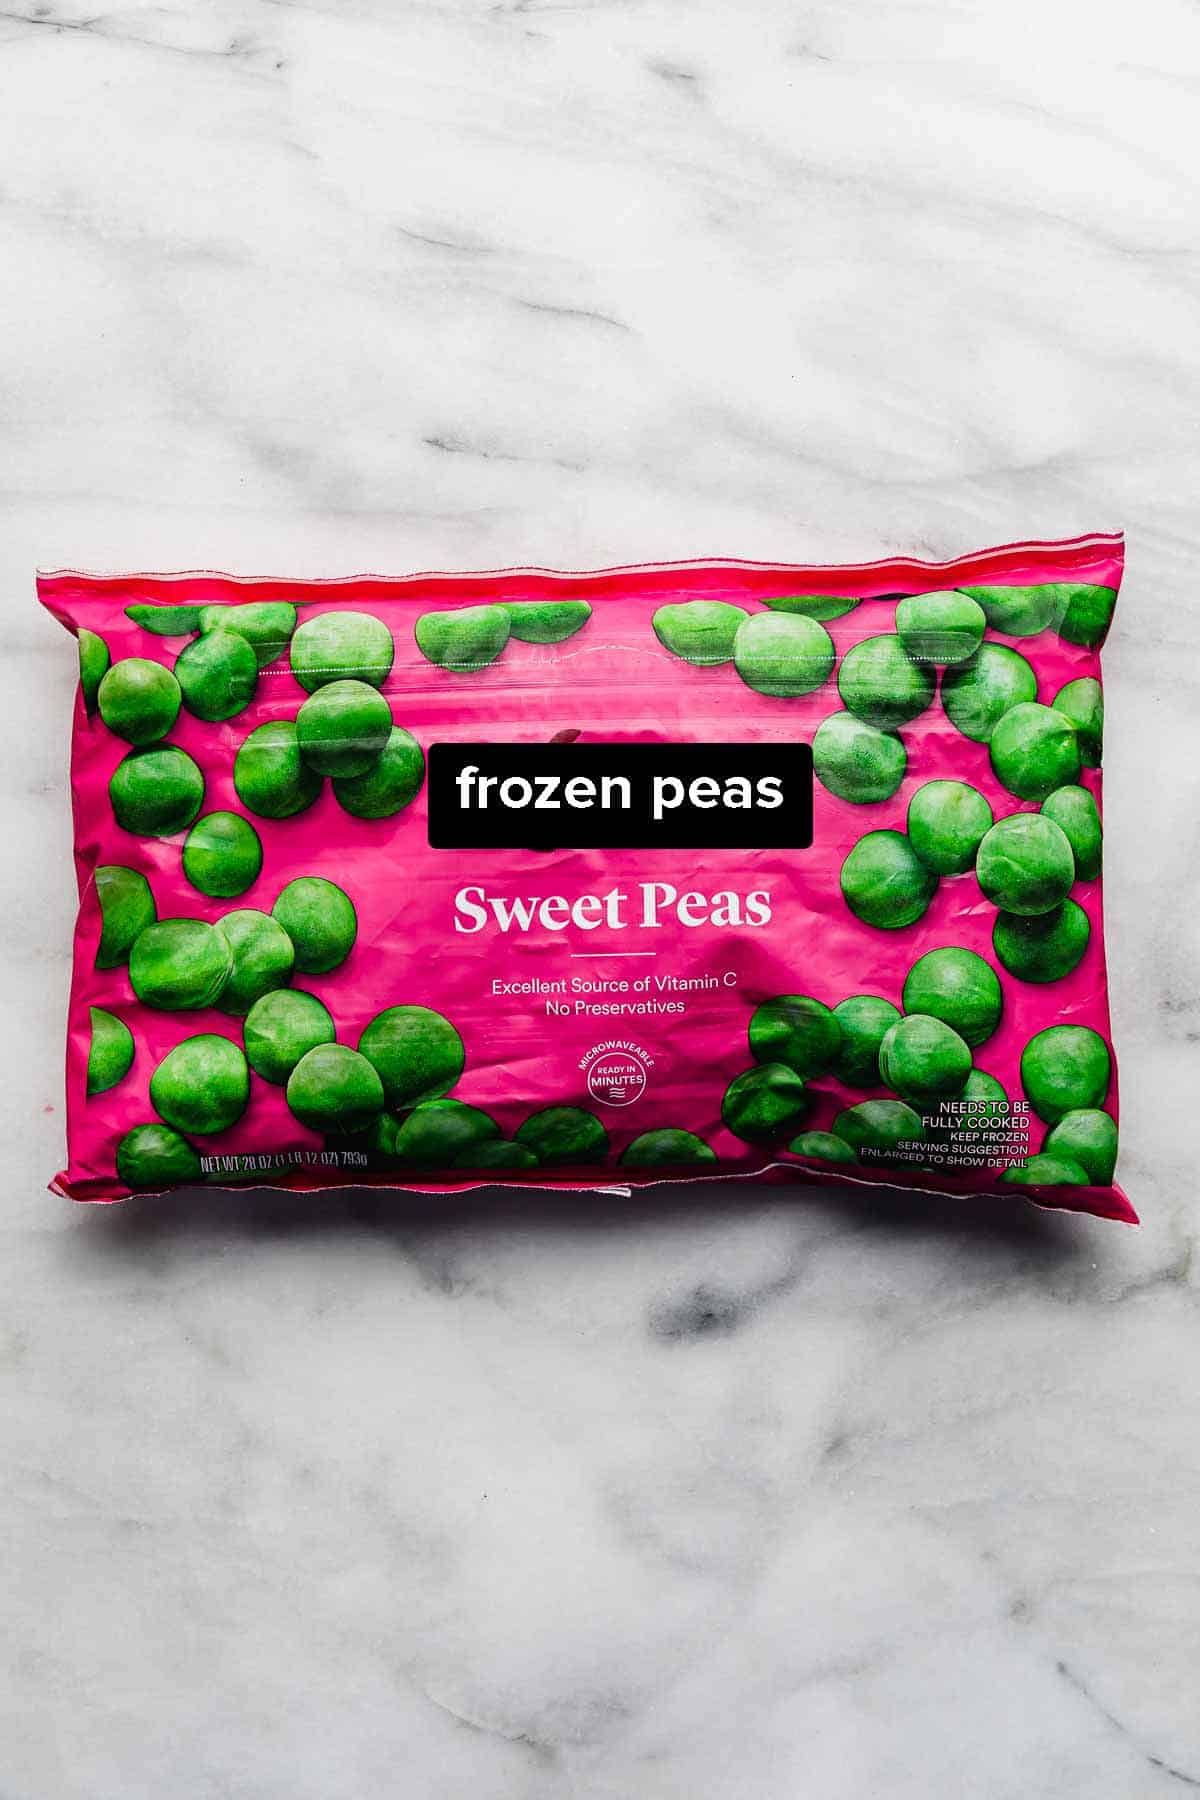 A bag of frozen peas on a white marble background used to show How to Cook Frozen Peas.